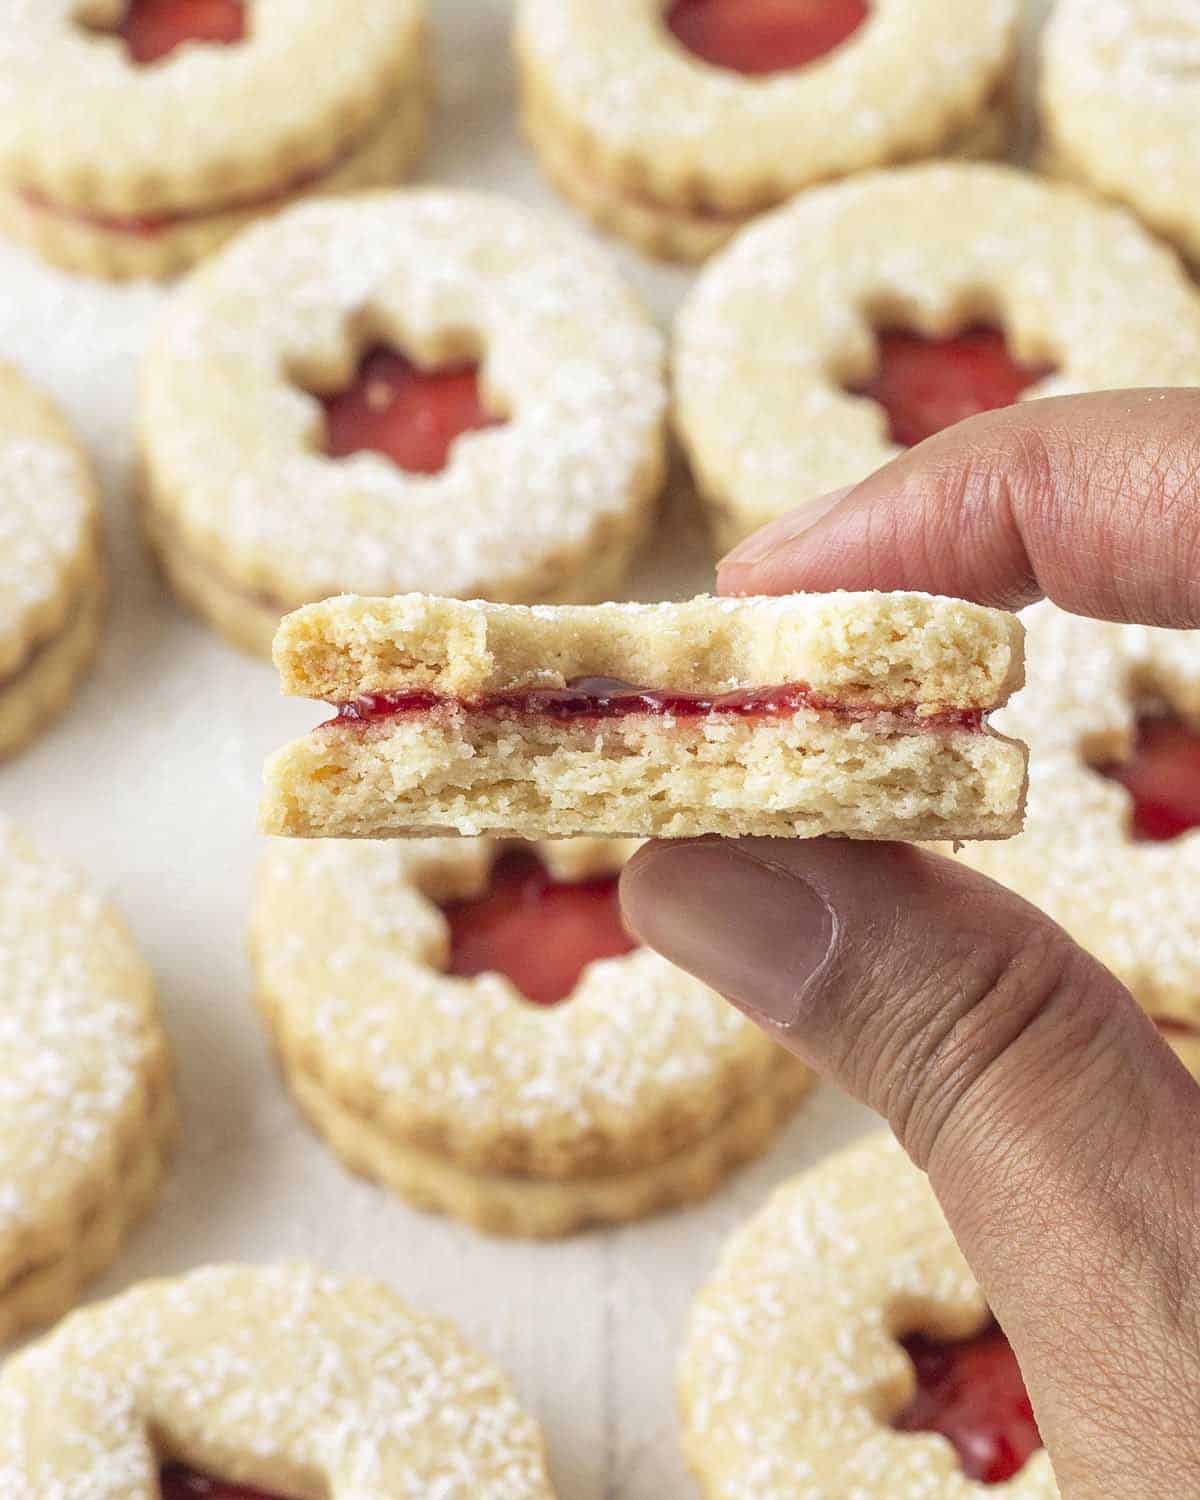 A hand holding up a Linzer cookie broken in half to show the inner crunchy texture.